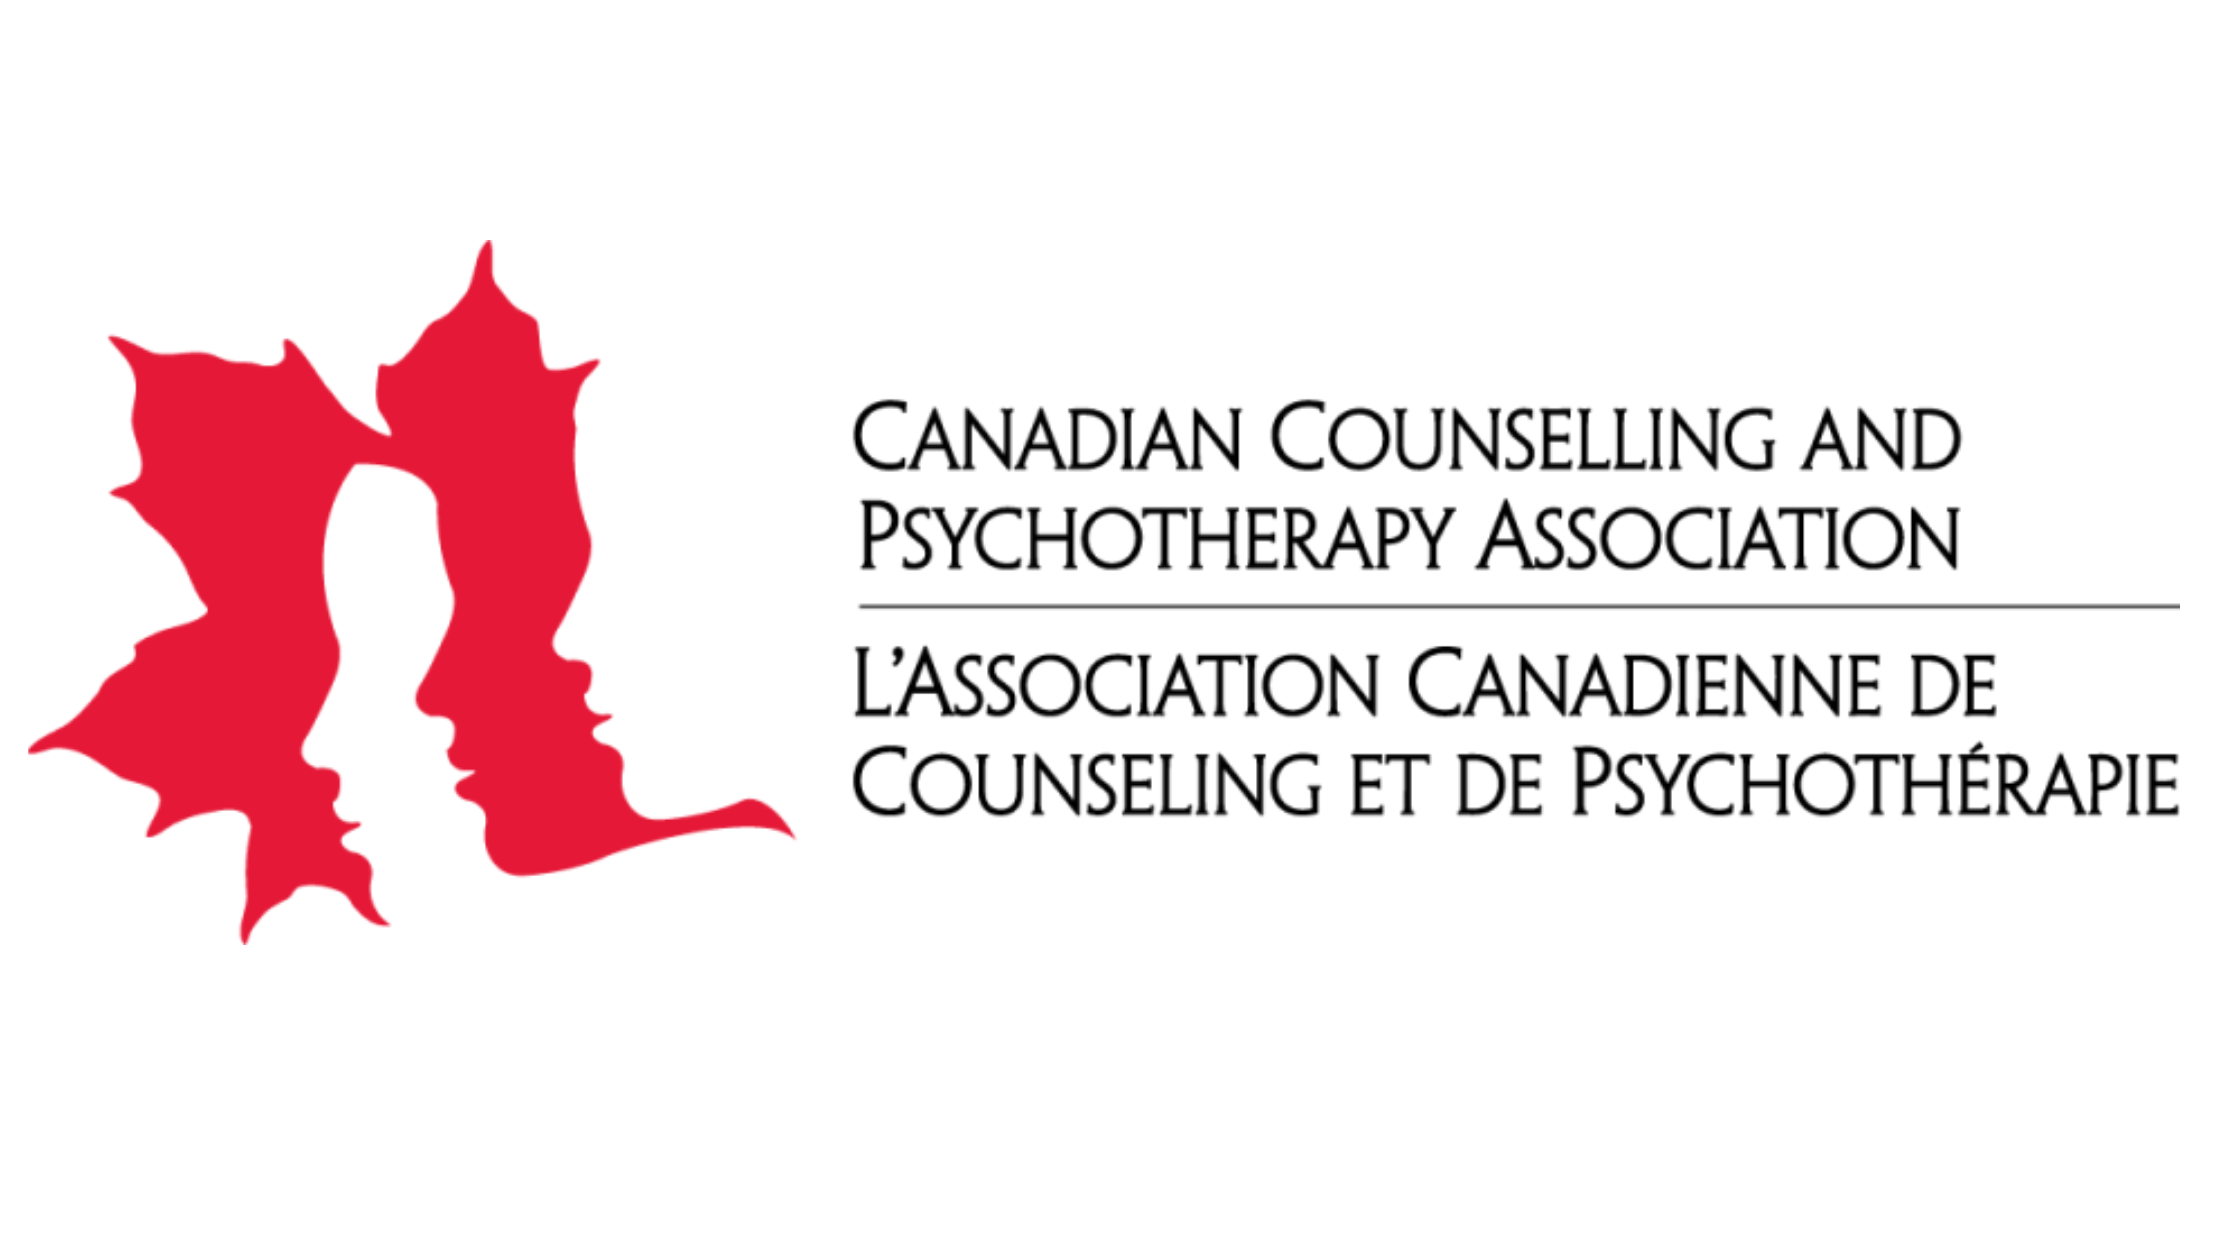 Canadian Counselling and Psychotherapy Association